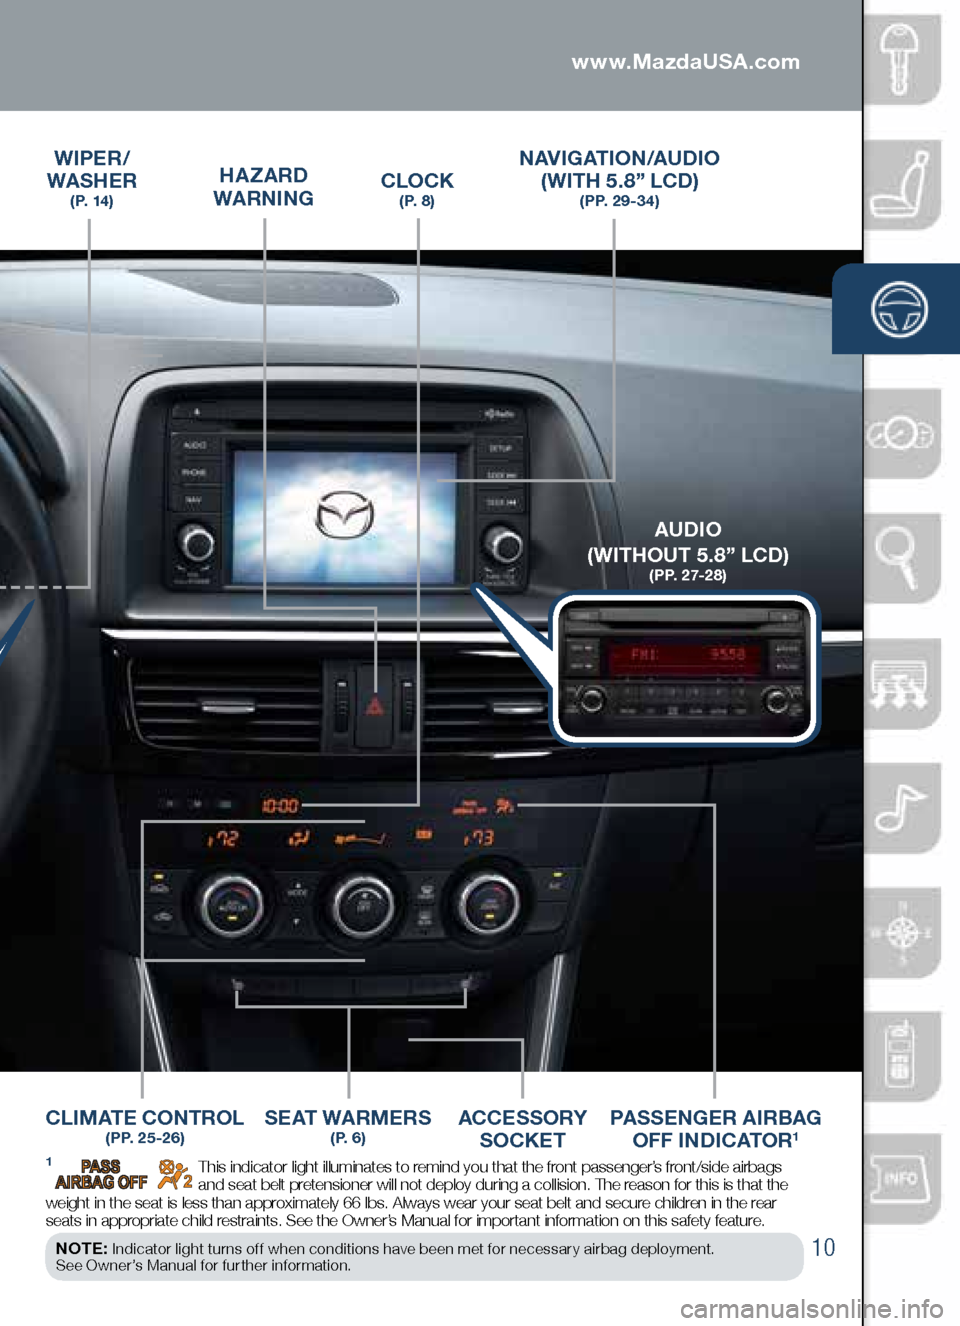 MAZDA MODEL CX-5 2014  Smart Start Guide (in English) Driver’s View
10
WIPER / 
WASHER  
( P.  14 )HAZARD  
WARNING NAVIGATION/AUDIO 
(WITH 5.8” LCD)   ( P P.  2 9 - 3 4 )
CLIMATE CONTROL   ( P P.  2 5 - 2 6 )SE AT  WA R M E R S  ( P.  6 )PASSENGER  